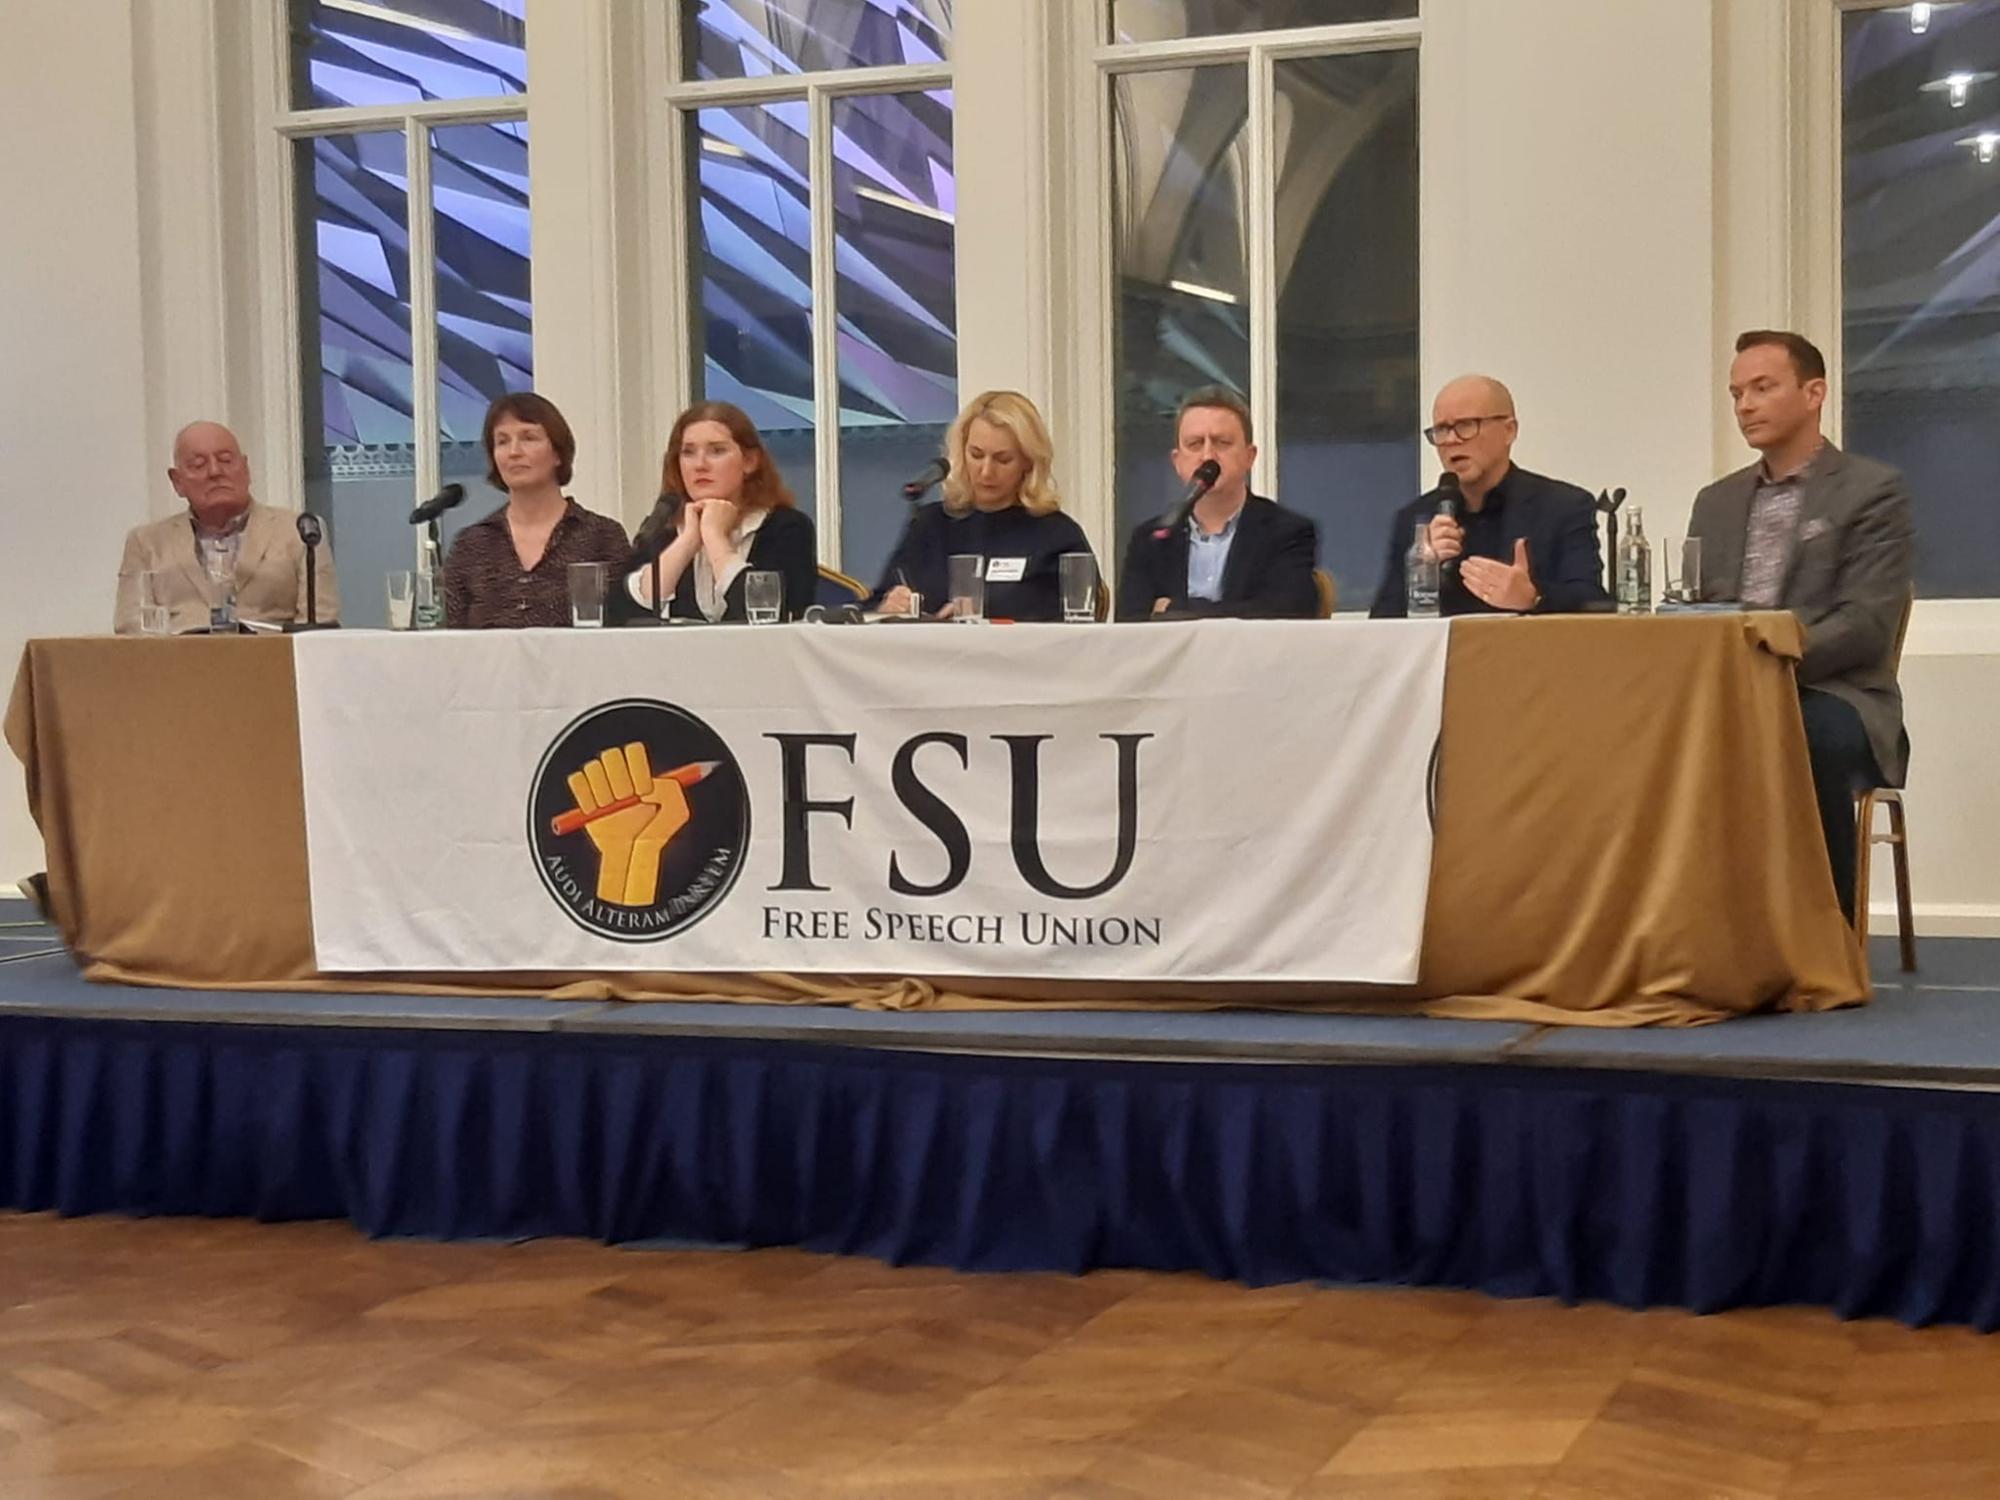 ben lowry: free speech advocates hold an important summit in belfast amid attacks on open expression